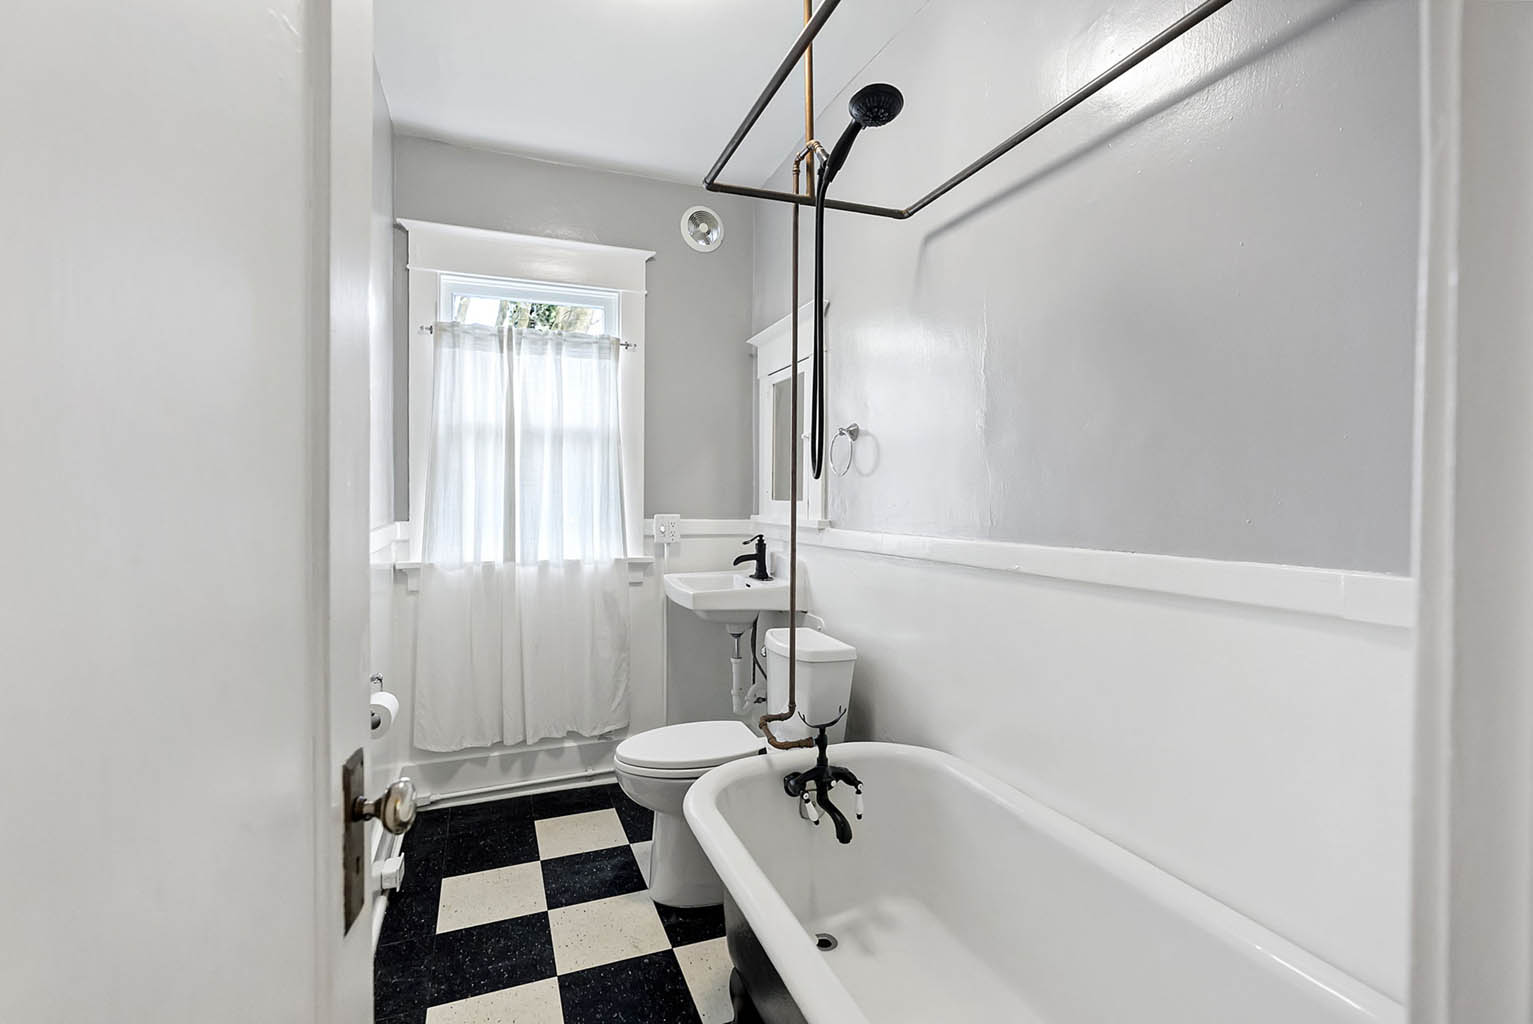 Bathroom with vintage tile and claw foot tub